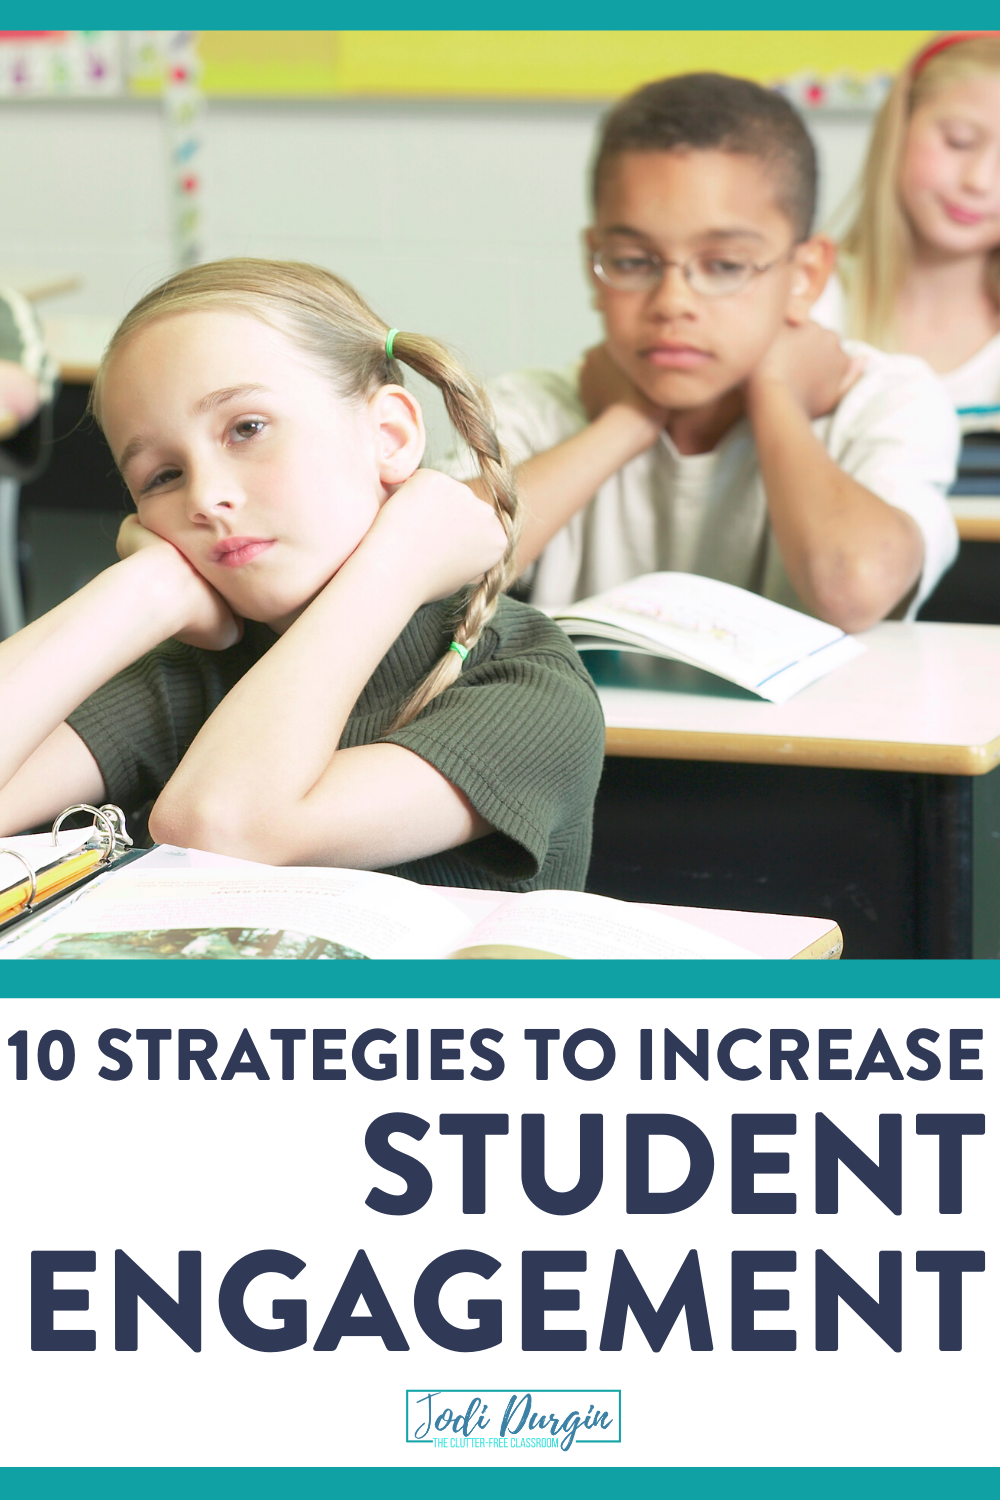 Grab these strategies, activities, and ideas to increase student engagement in your elementary classroom during all content areas, including math. This Clutter-Free Classroom blog post was written for first, second, third, fourth, and fifth grade teachers. Check it out now! #classroommanagementstrategies #teachingstrategies #elementaryclassroom